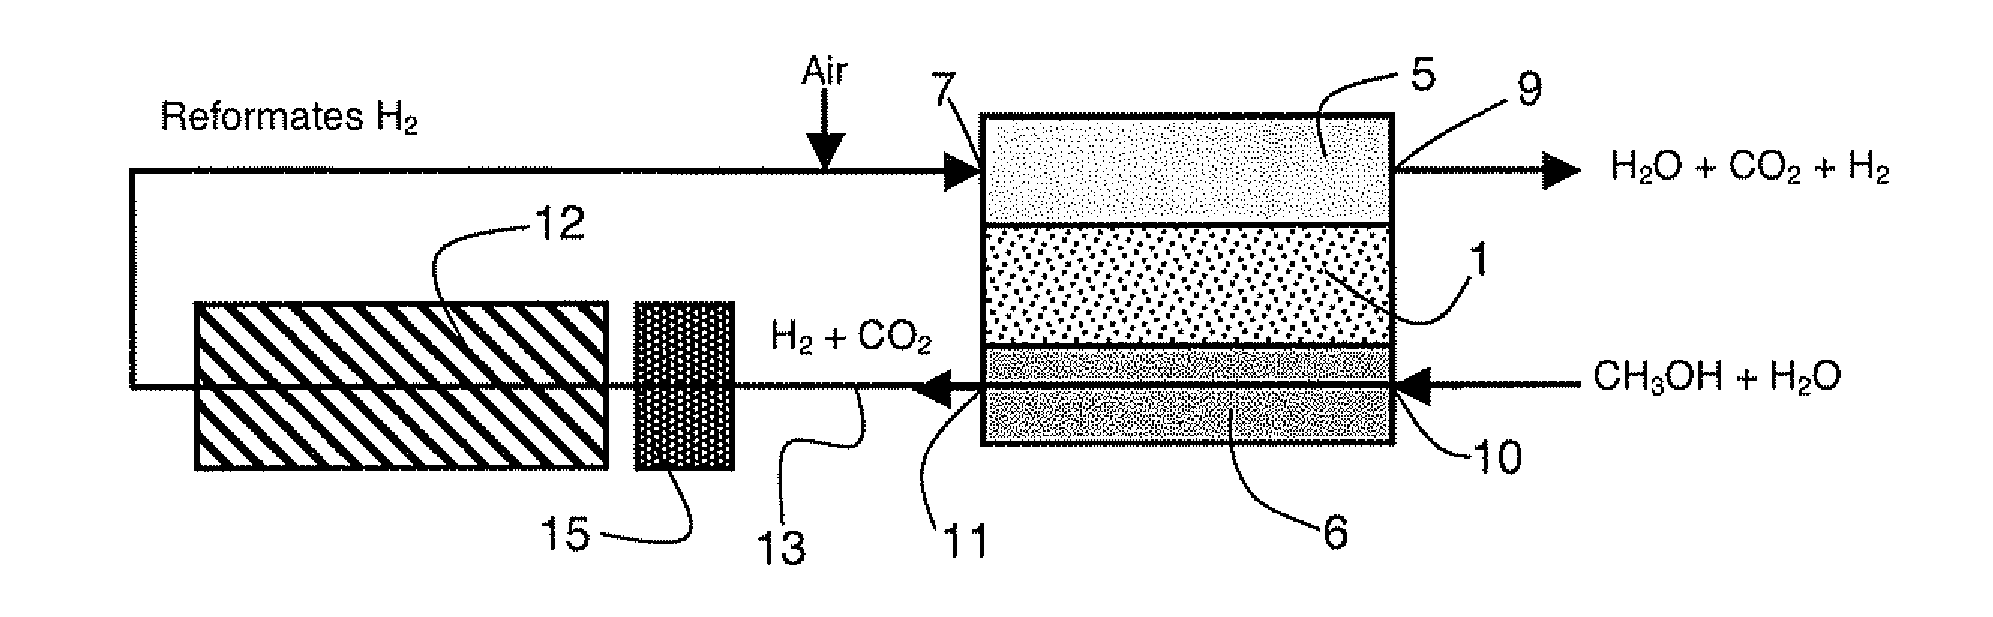 Electrical generator using the thermoelectric effect and two chemical reactions, i.e. exothermic and endothermic reactions, to generate and dissipate heat, respectively